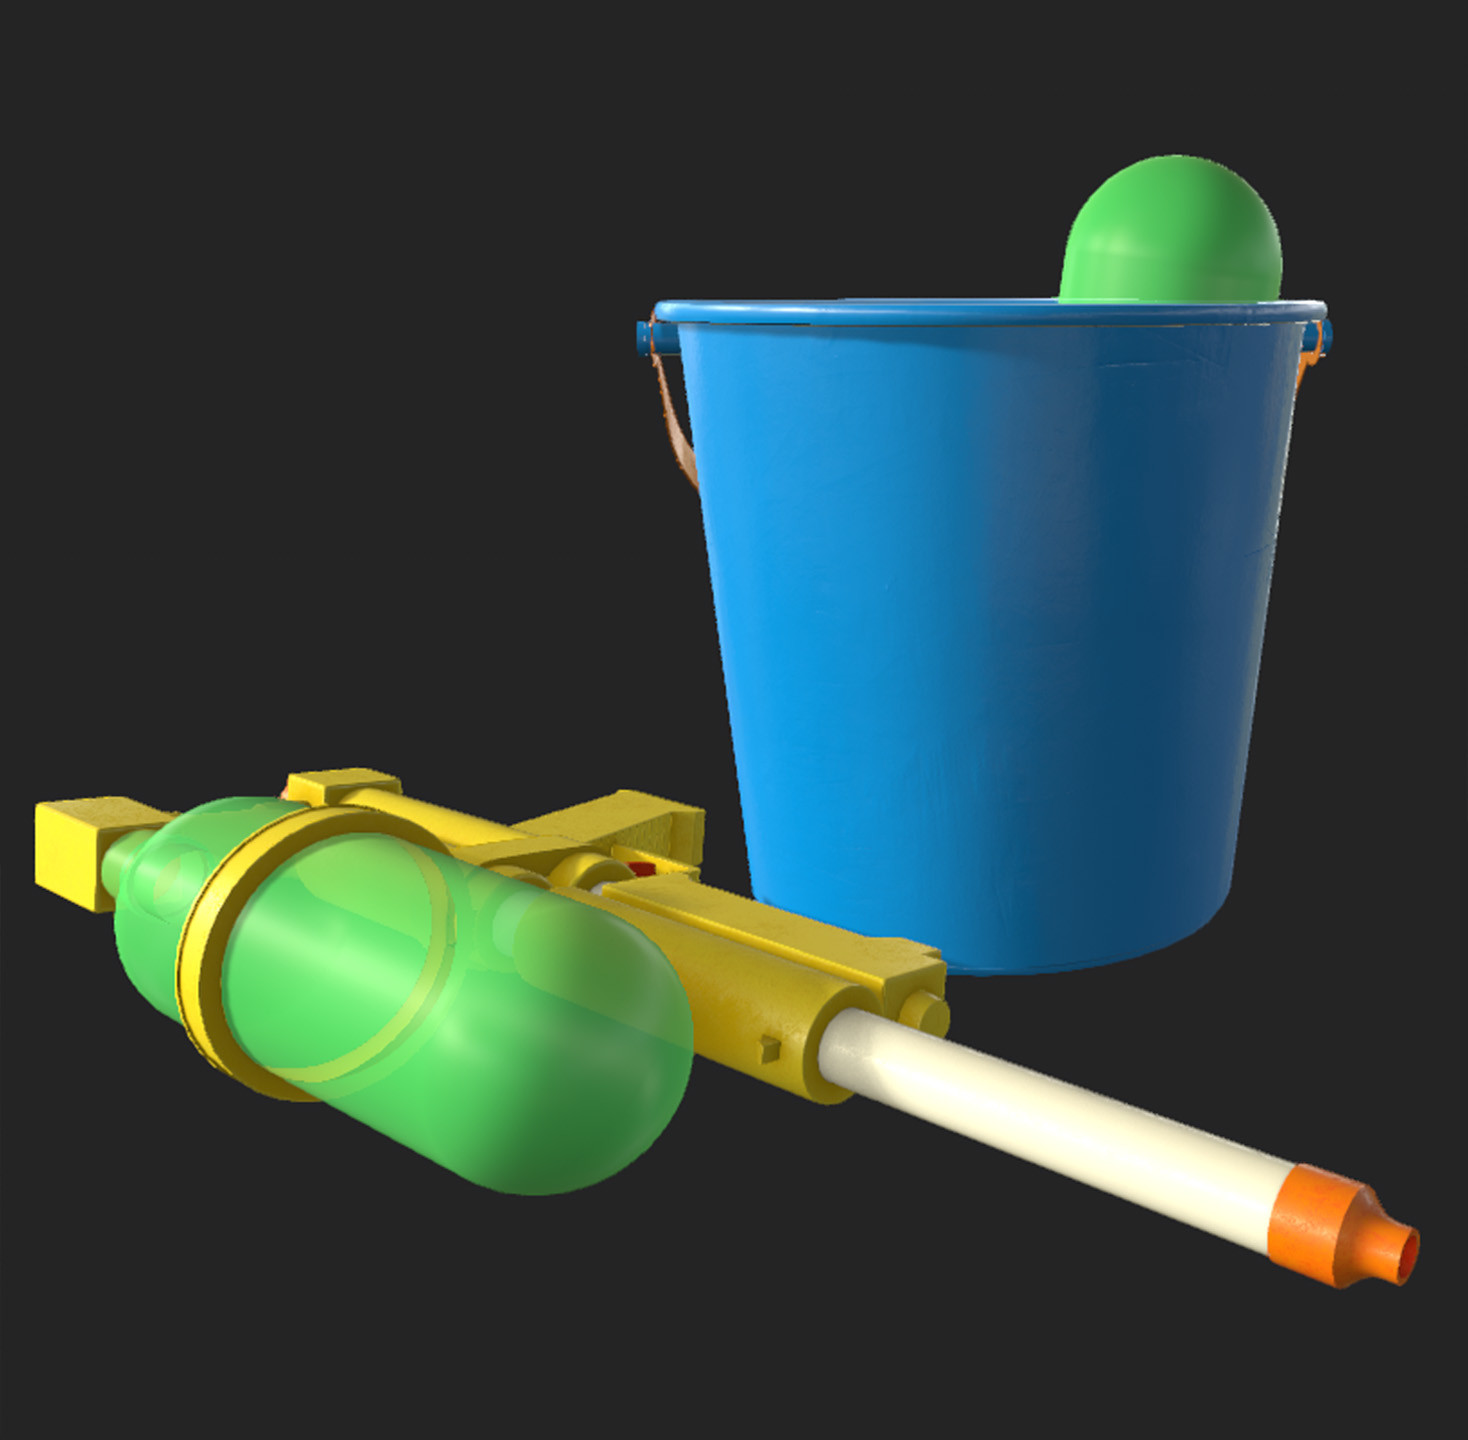 Water blaster and bucket